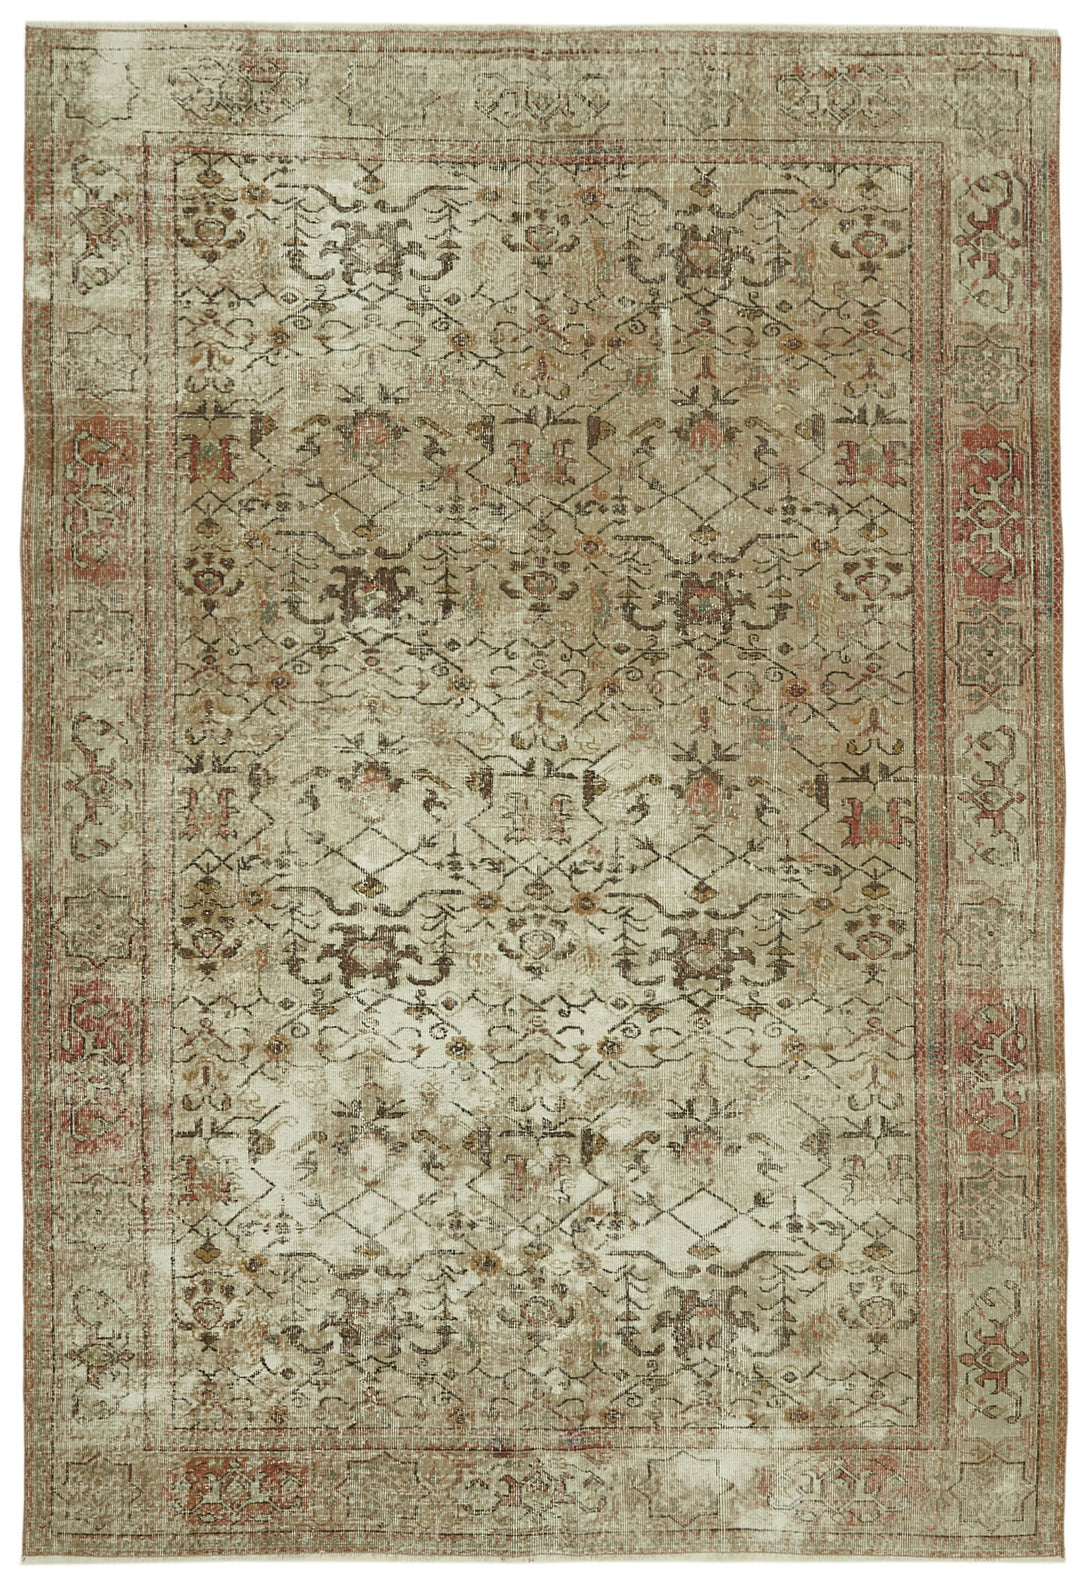 Handmade White Wash Area Rug > Design# OL-AC-41756 > Size: 6'-9" x 10'-0", Carpet Culture Rugs, Handmade Rugs, NYC Rugs, New Rugs, Shop Rugs, Rug Store, Outlet Rugs, SoHo Rugs, Rugs in USA